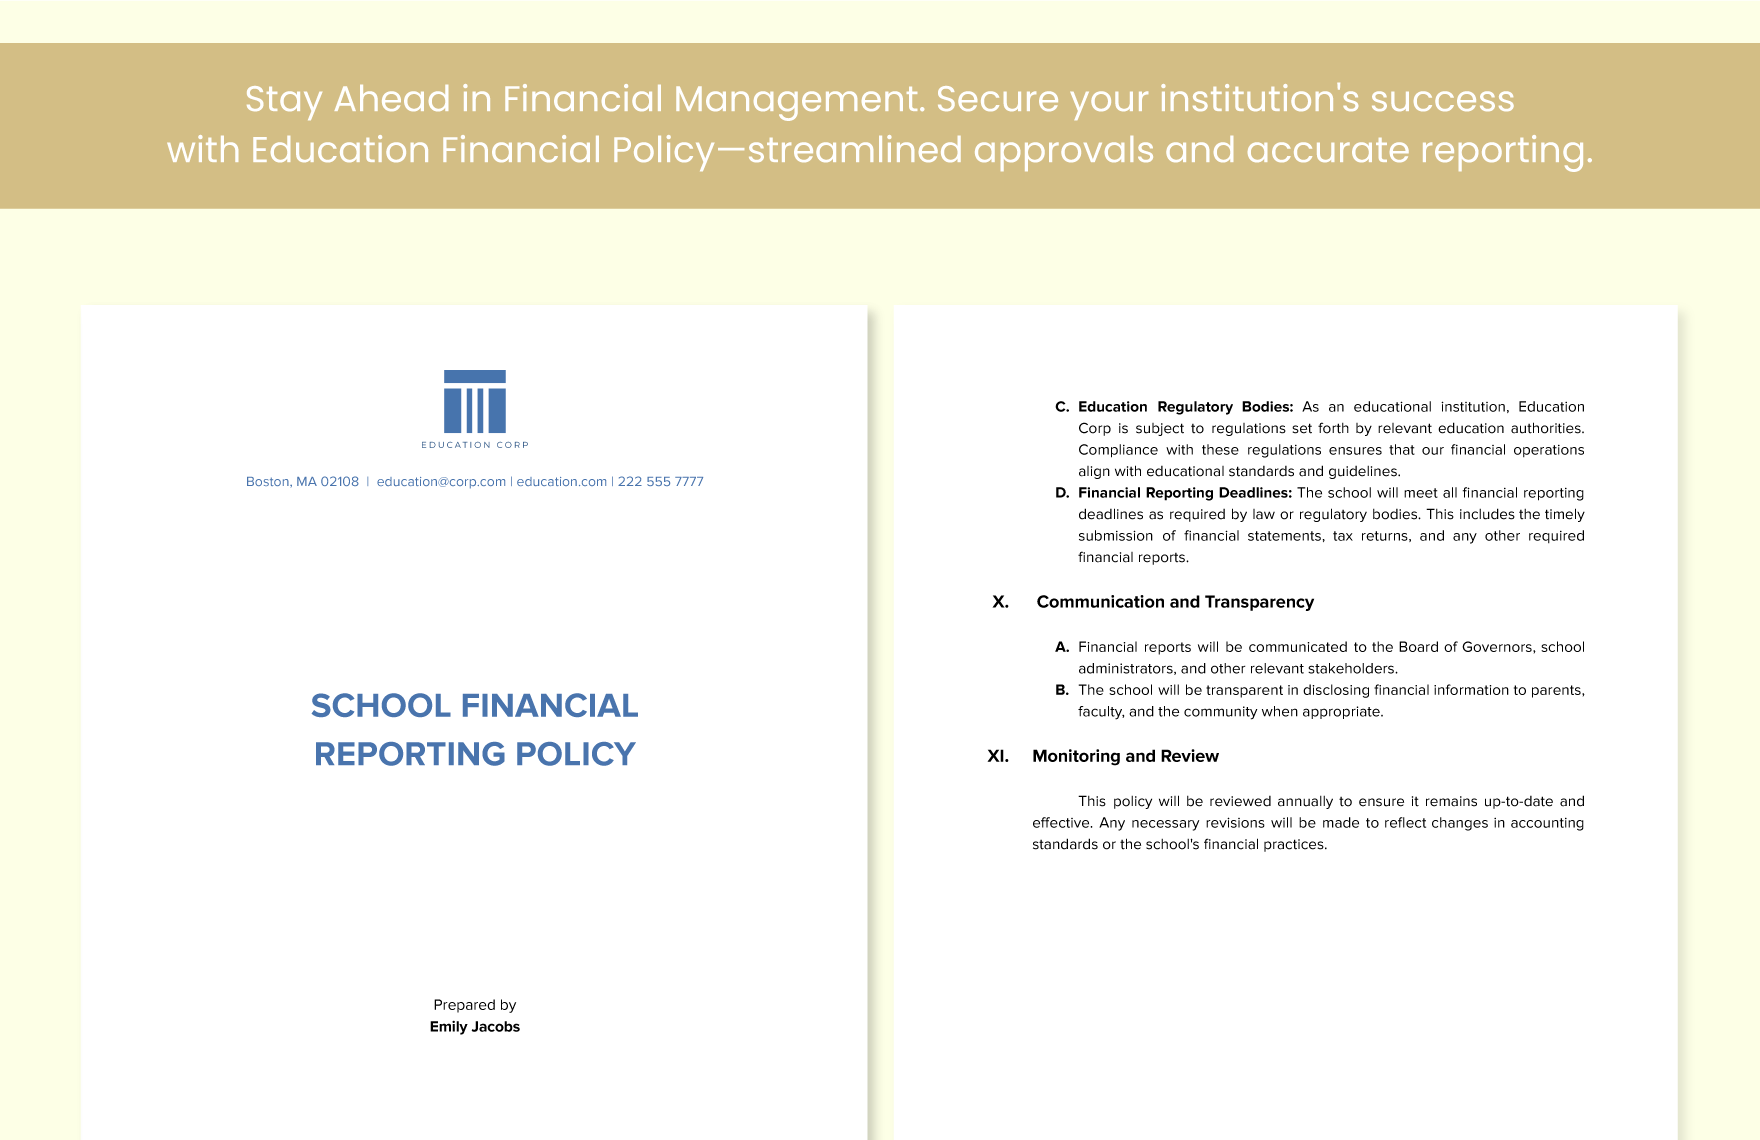 School Financial Reporting Policy Template